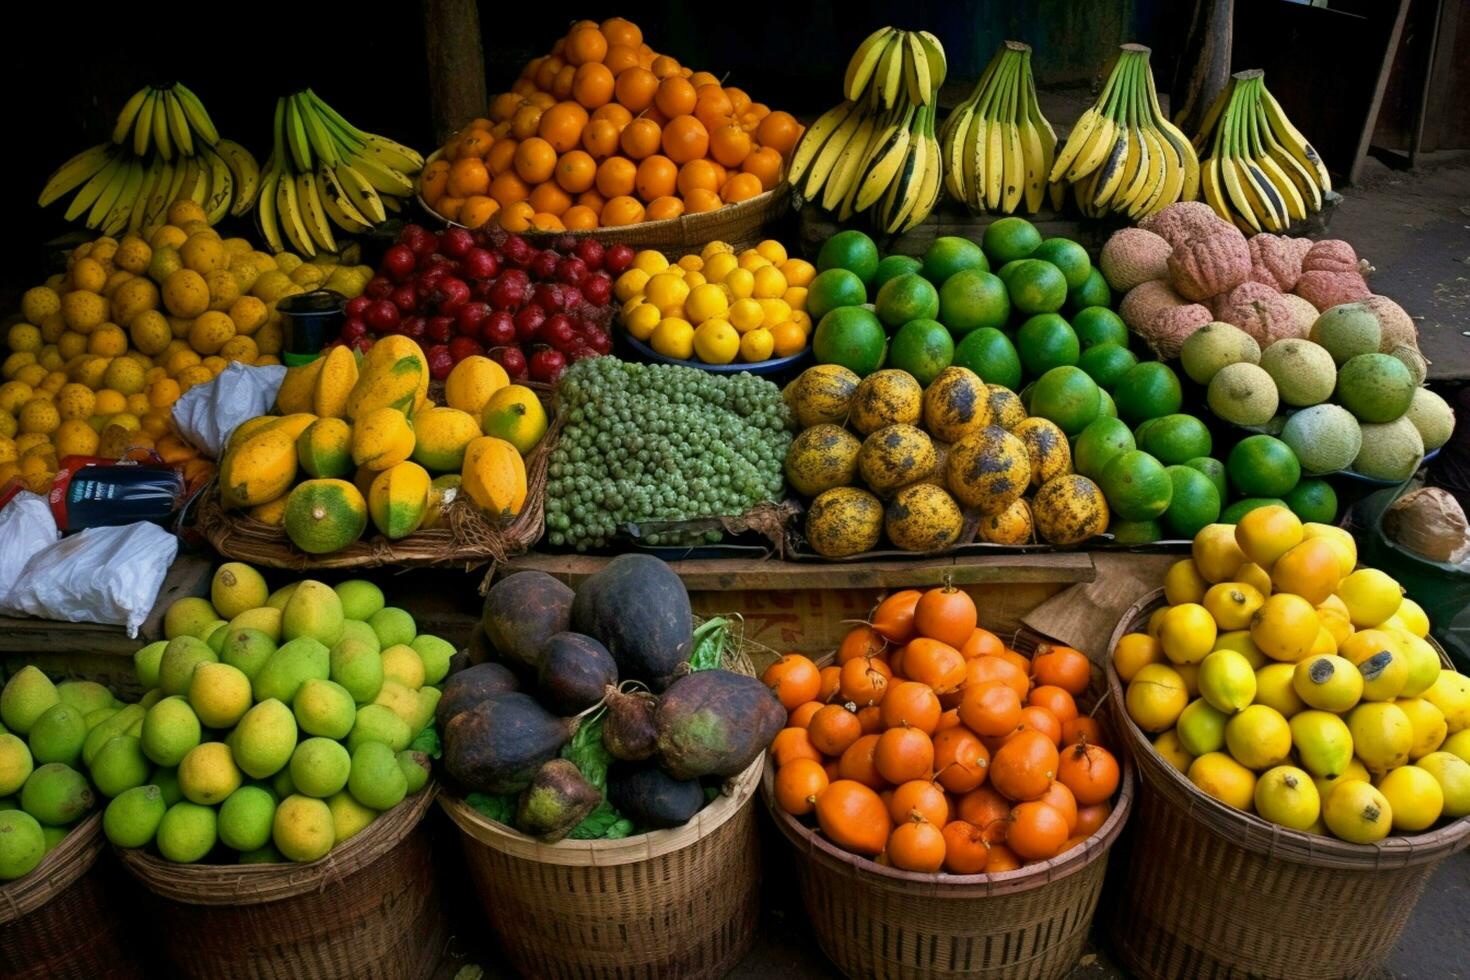 The abundance and variety of African fruits and veg photo